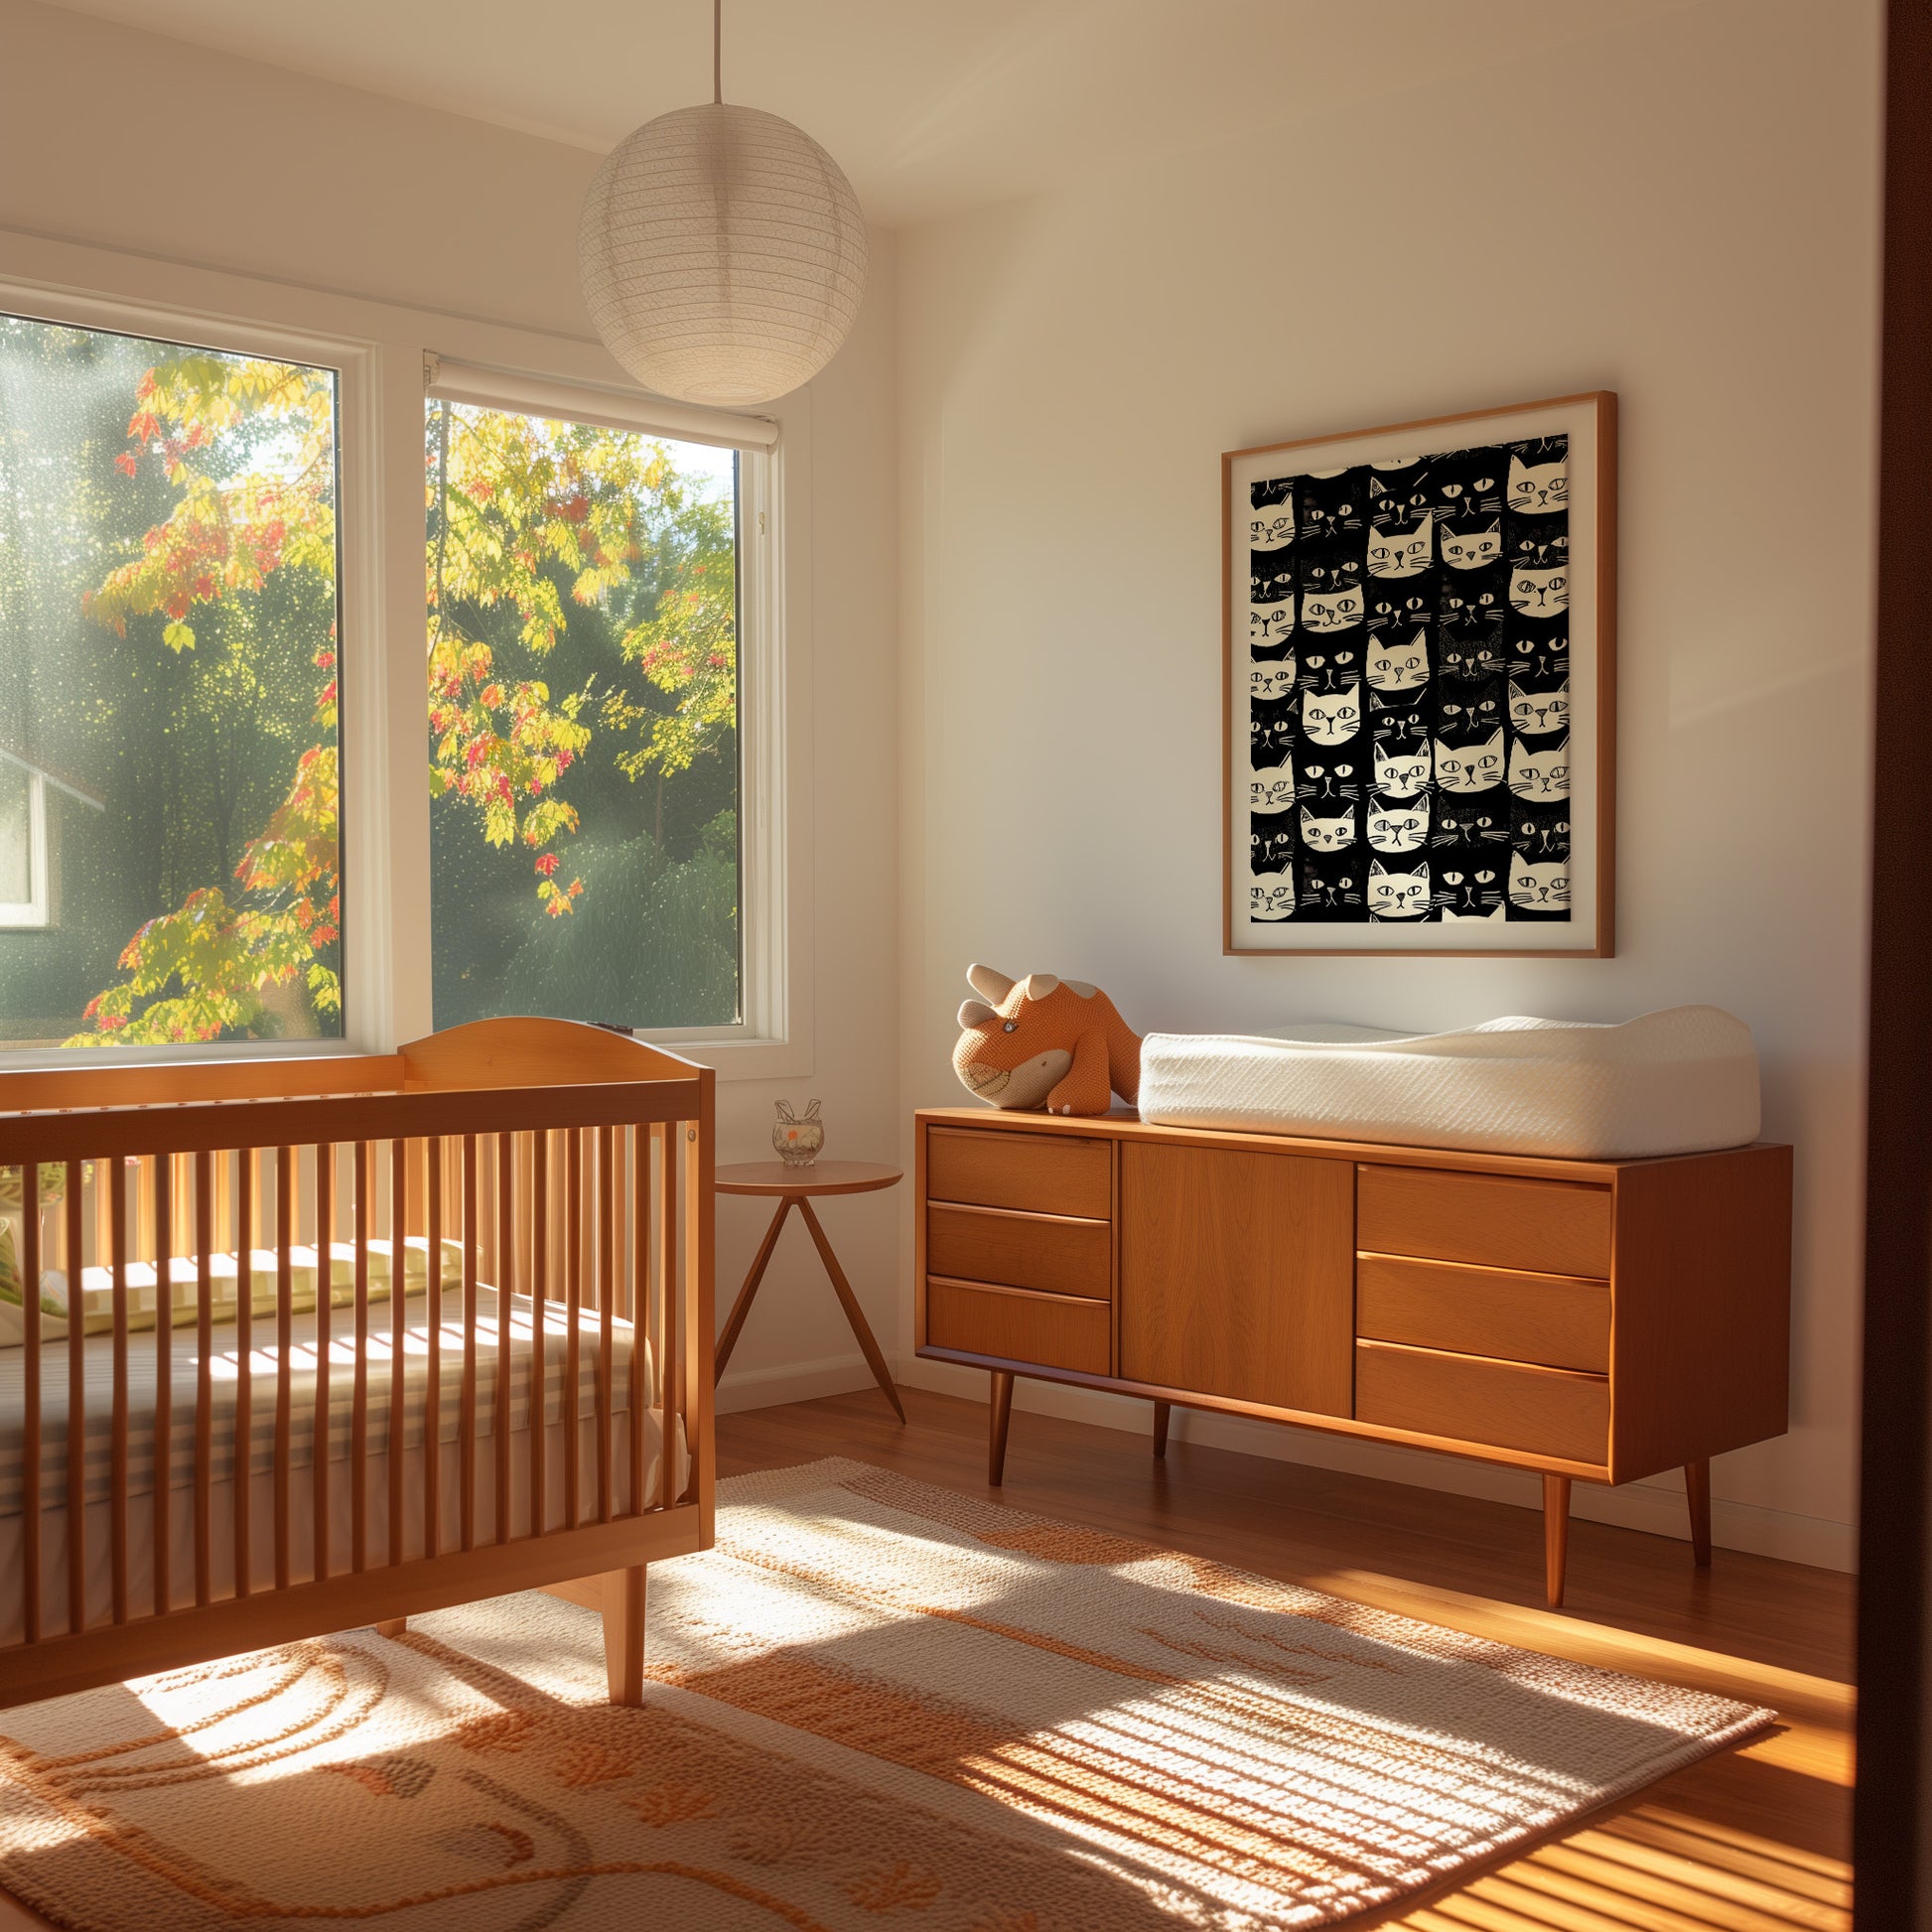 Cozy nursery room with crib, dresser, and autumn trees visible outside the window.